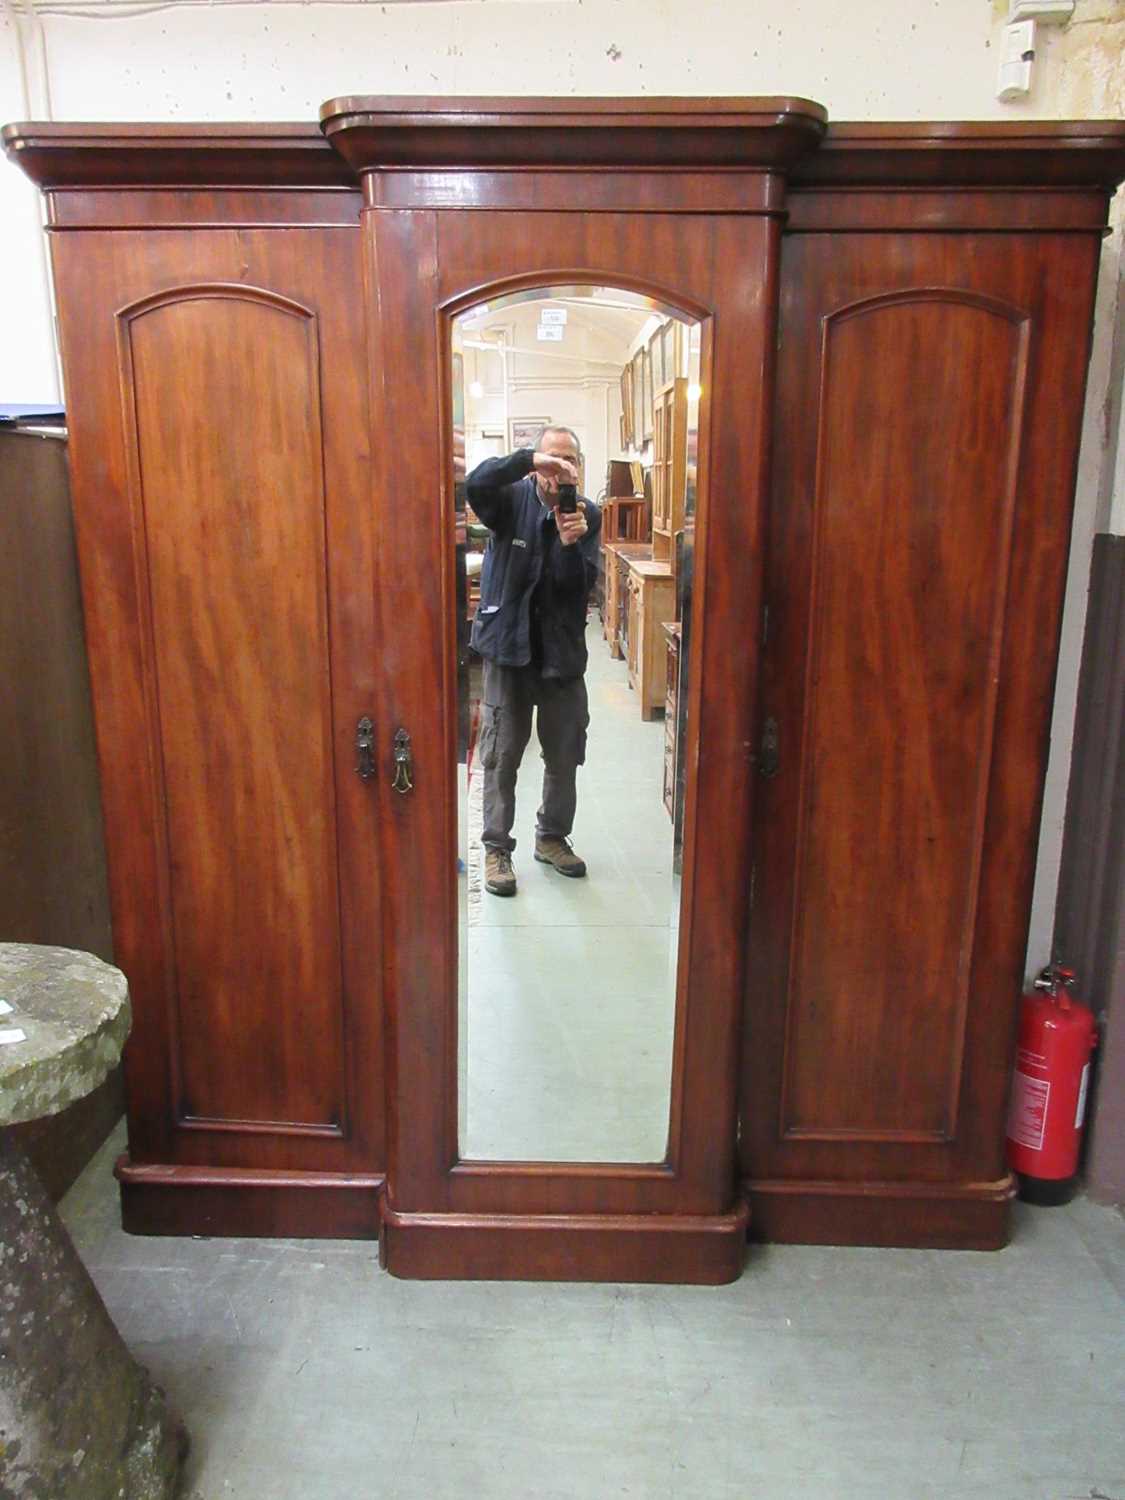 A Victorian mahogany three door wardrobe, with beveled mirrored centre door flanked by two other